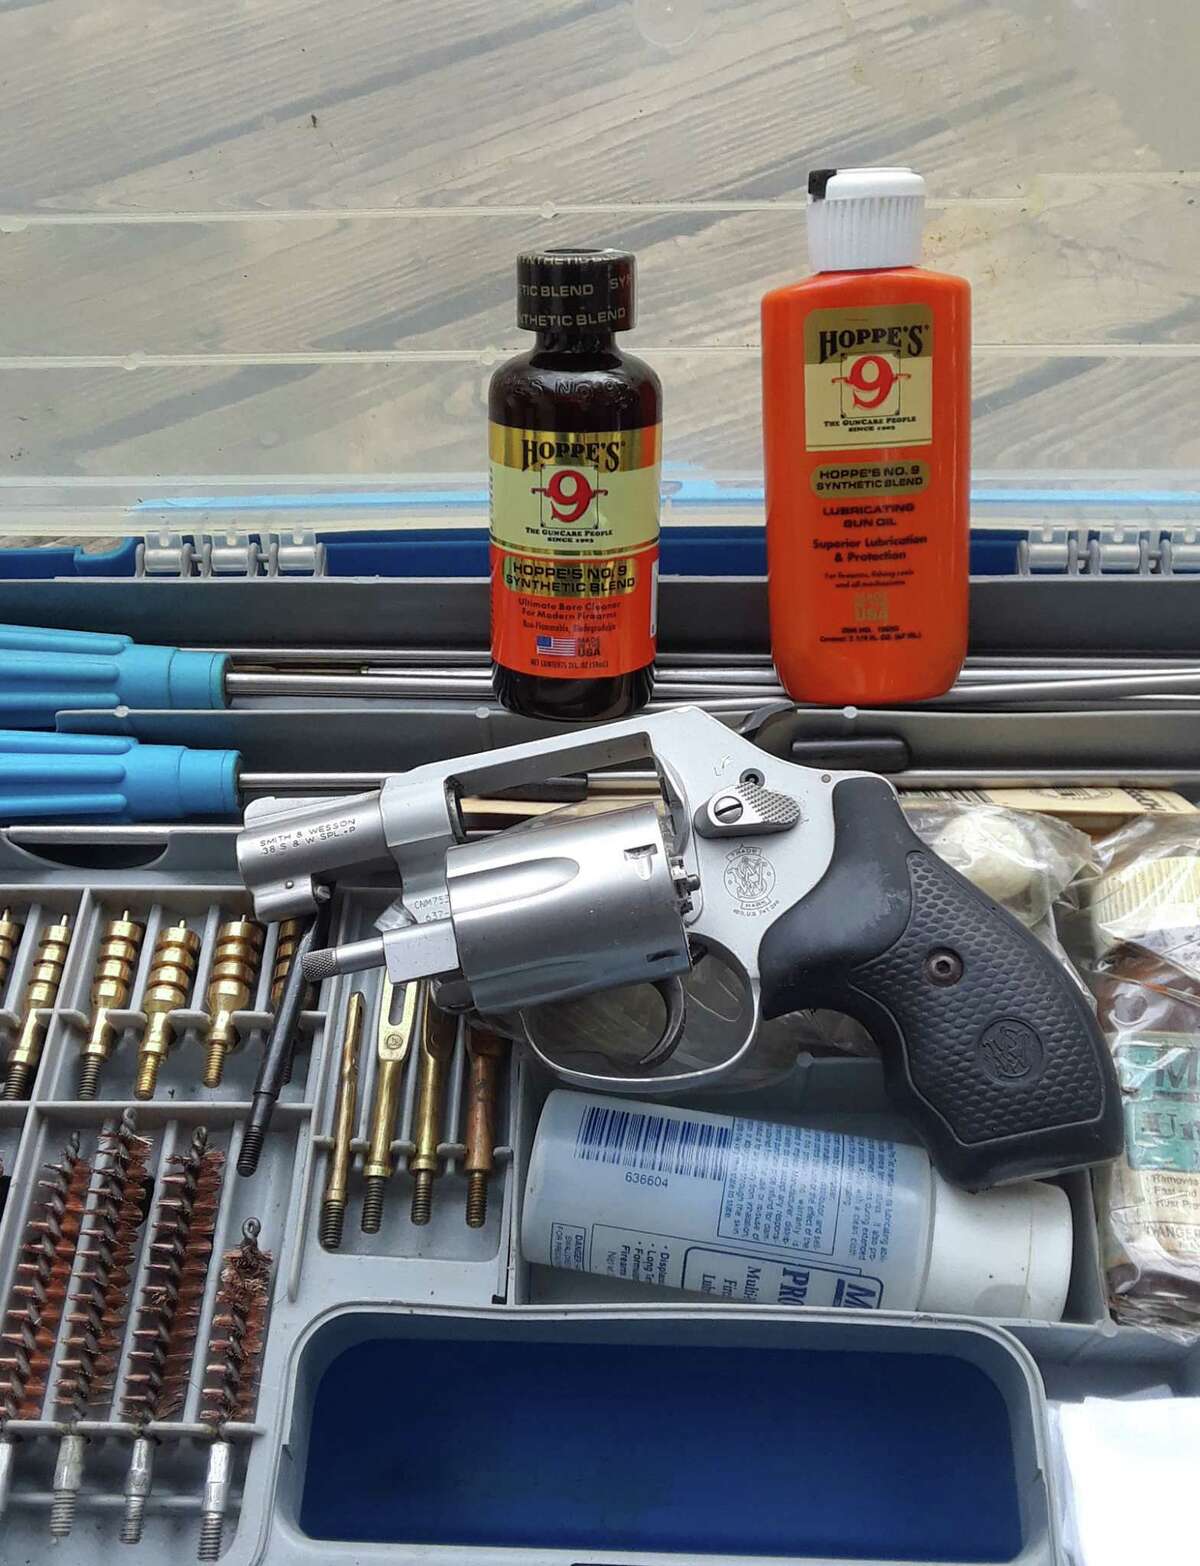 There are cleaning products besides HoppeÂ?’s No. 9, but when cleaning my guns it sure is hard to change from a product that has worked exceptionally well for over half a century.